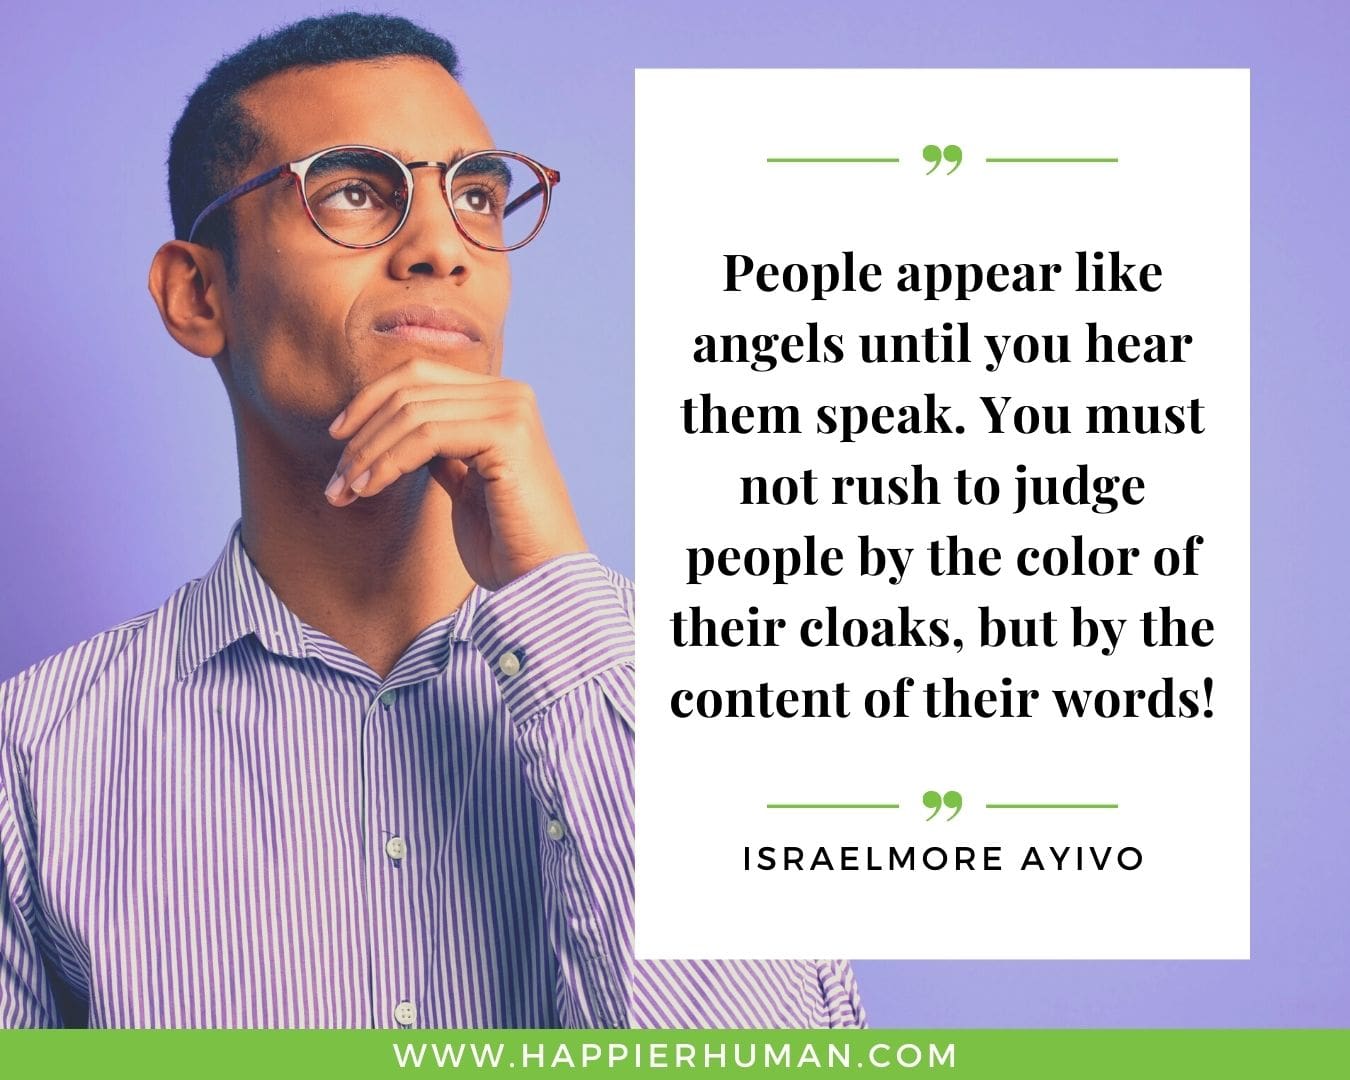 Toxic People Quotes - “People appear like angels until you hear them speak. You must not rush to judge people by the color of their cloaks, but by the content of their words!” – Israelmore Ayivo